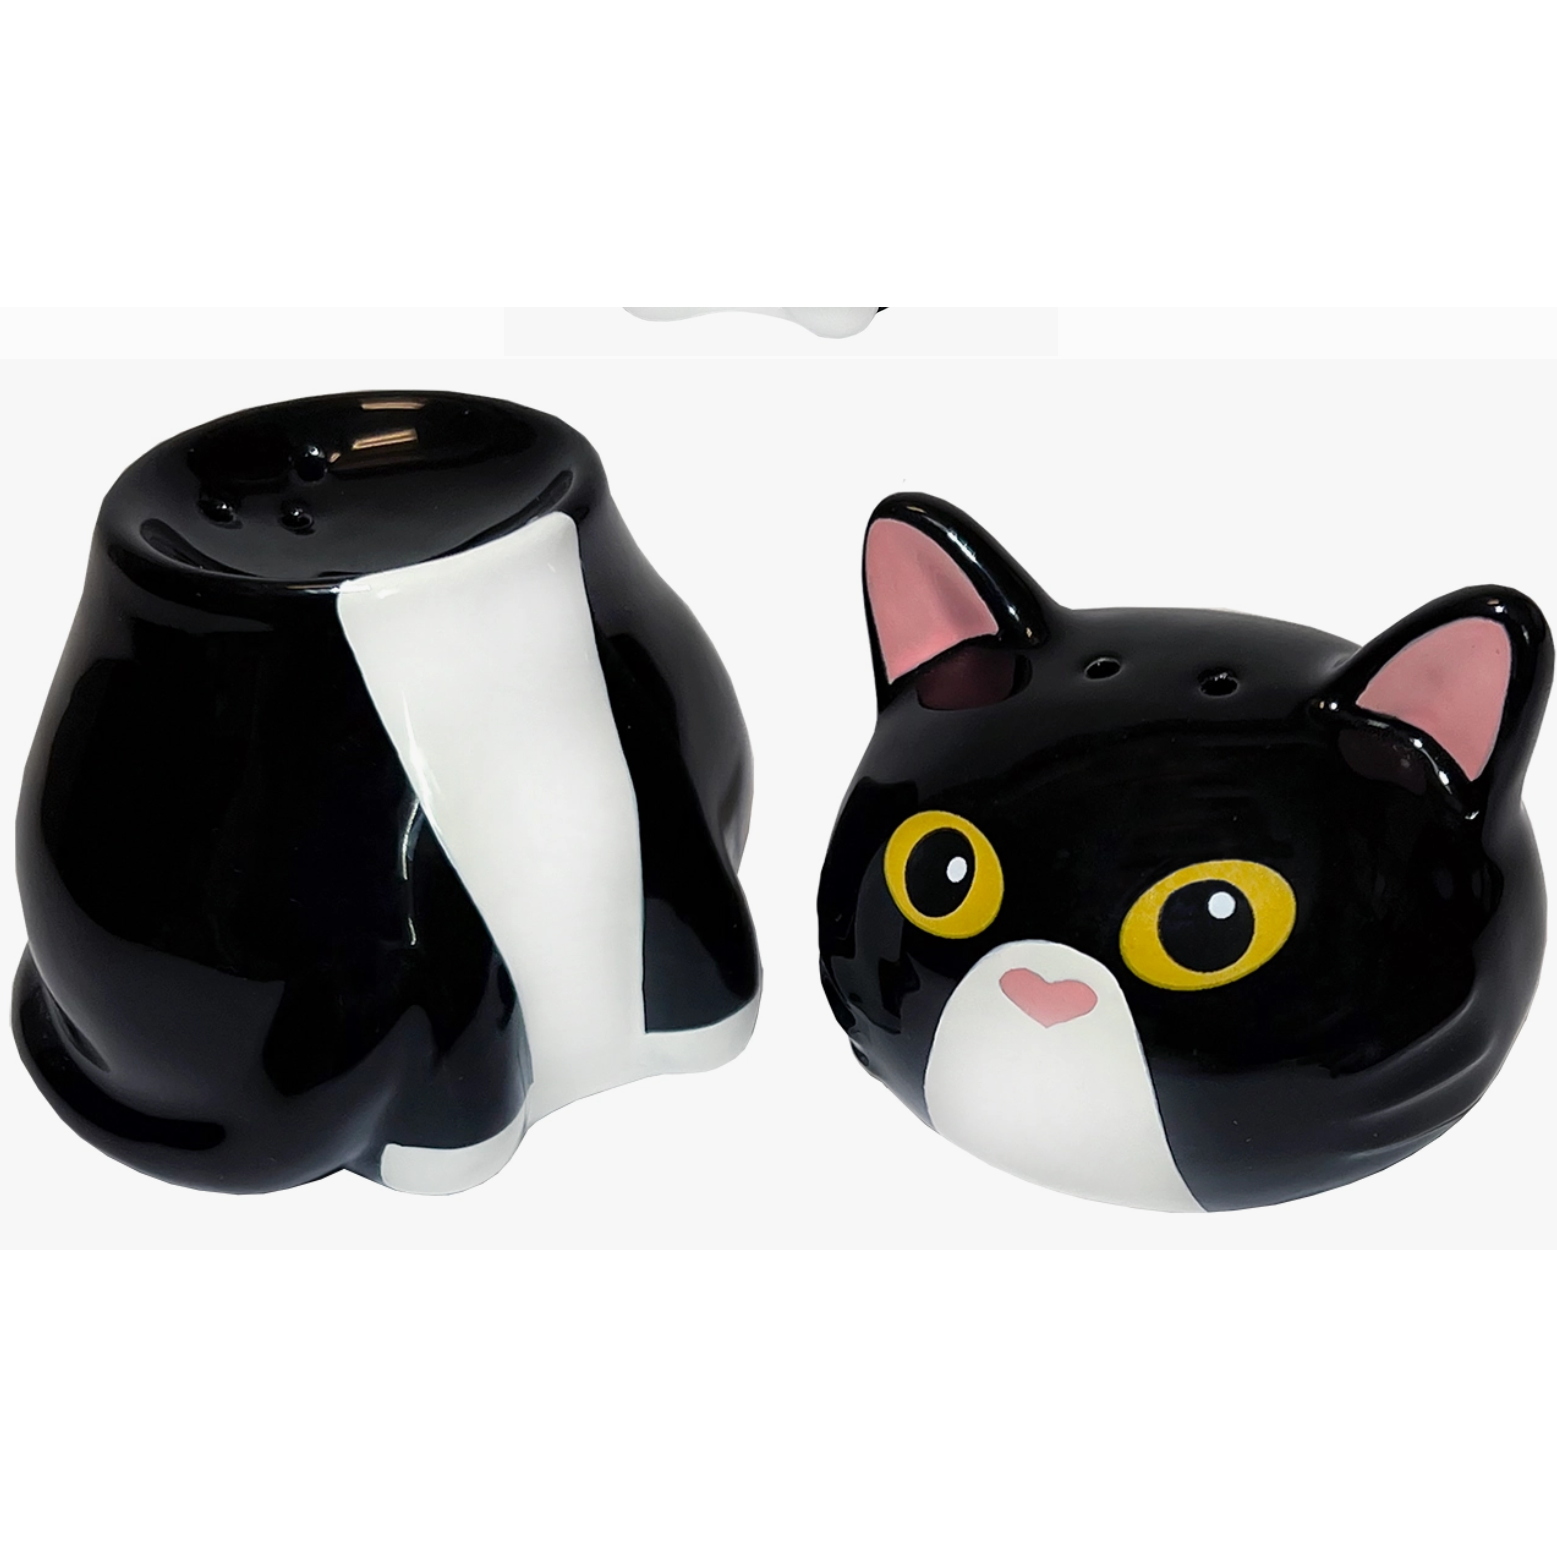 Cat Salt and Pepper Shaker, Funny Cat Themed Gifts